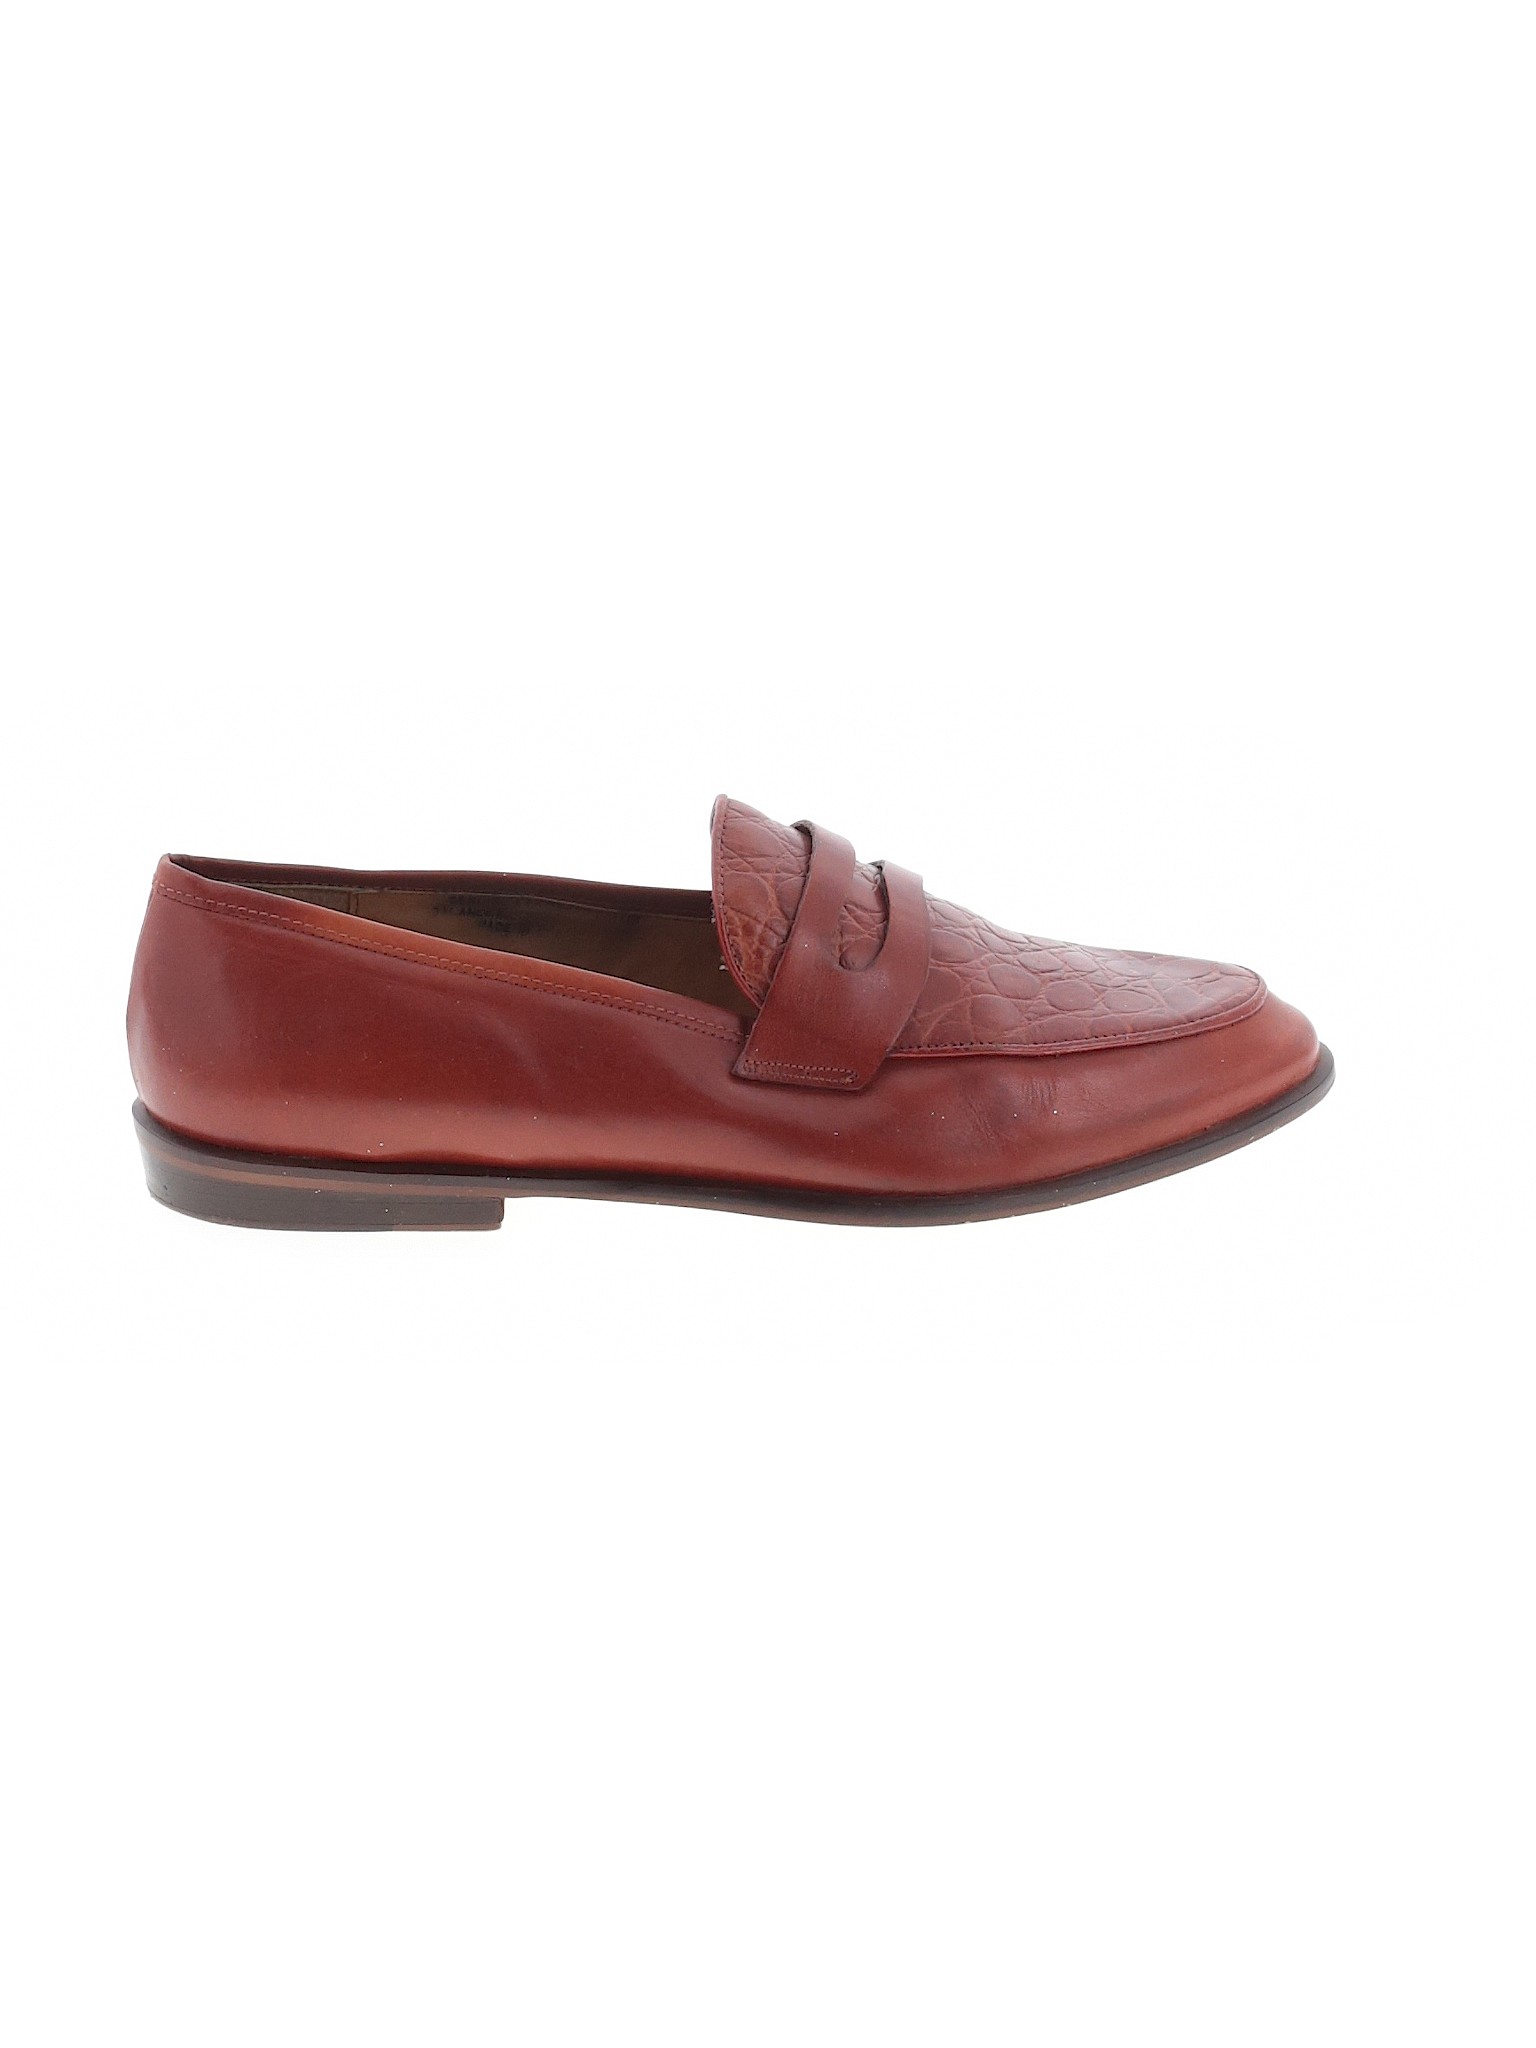 Ann Marino Solid Maroon Red Flats Size 8 - 43% off | thredUP